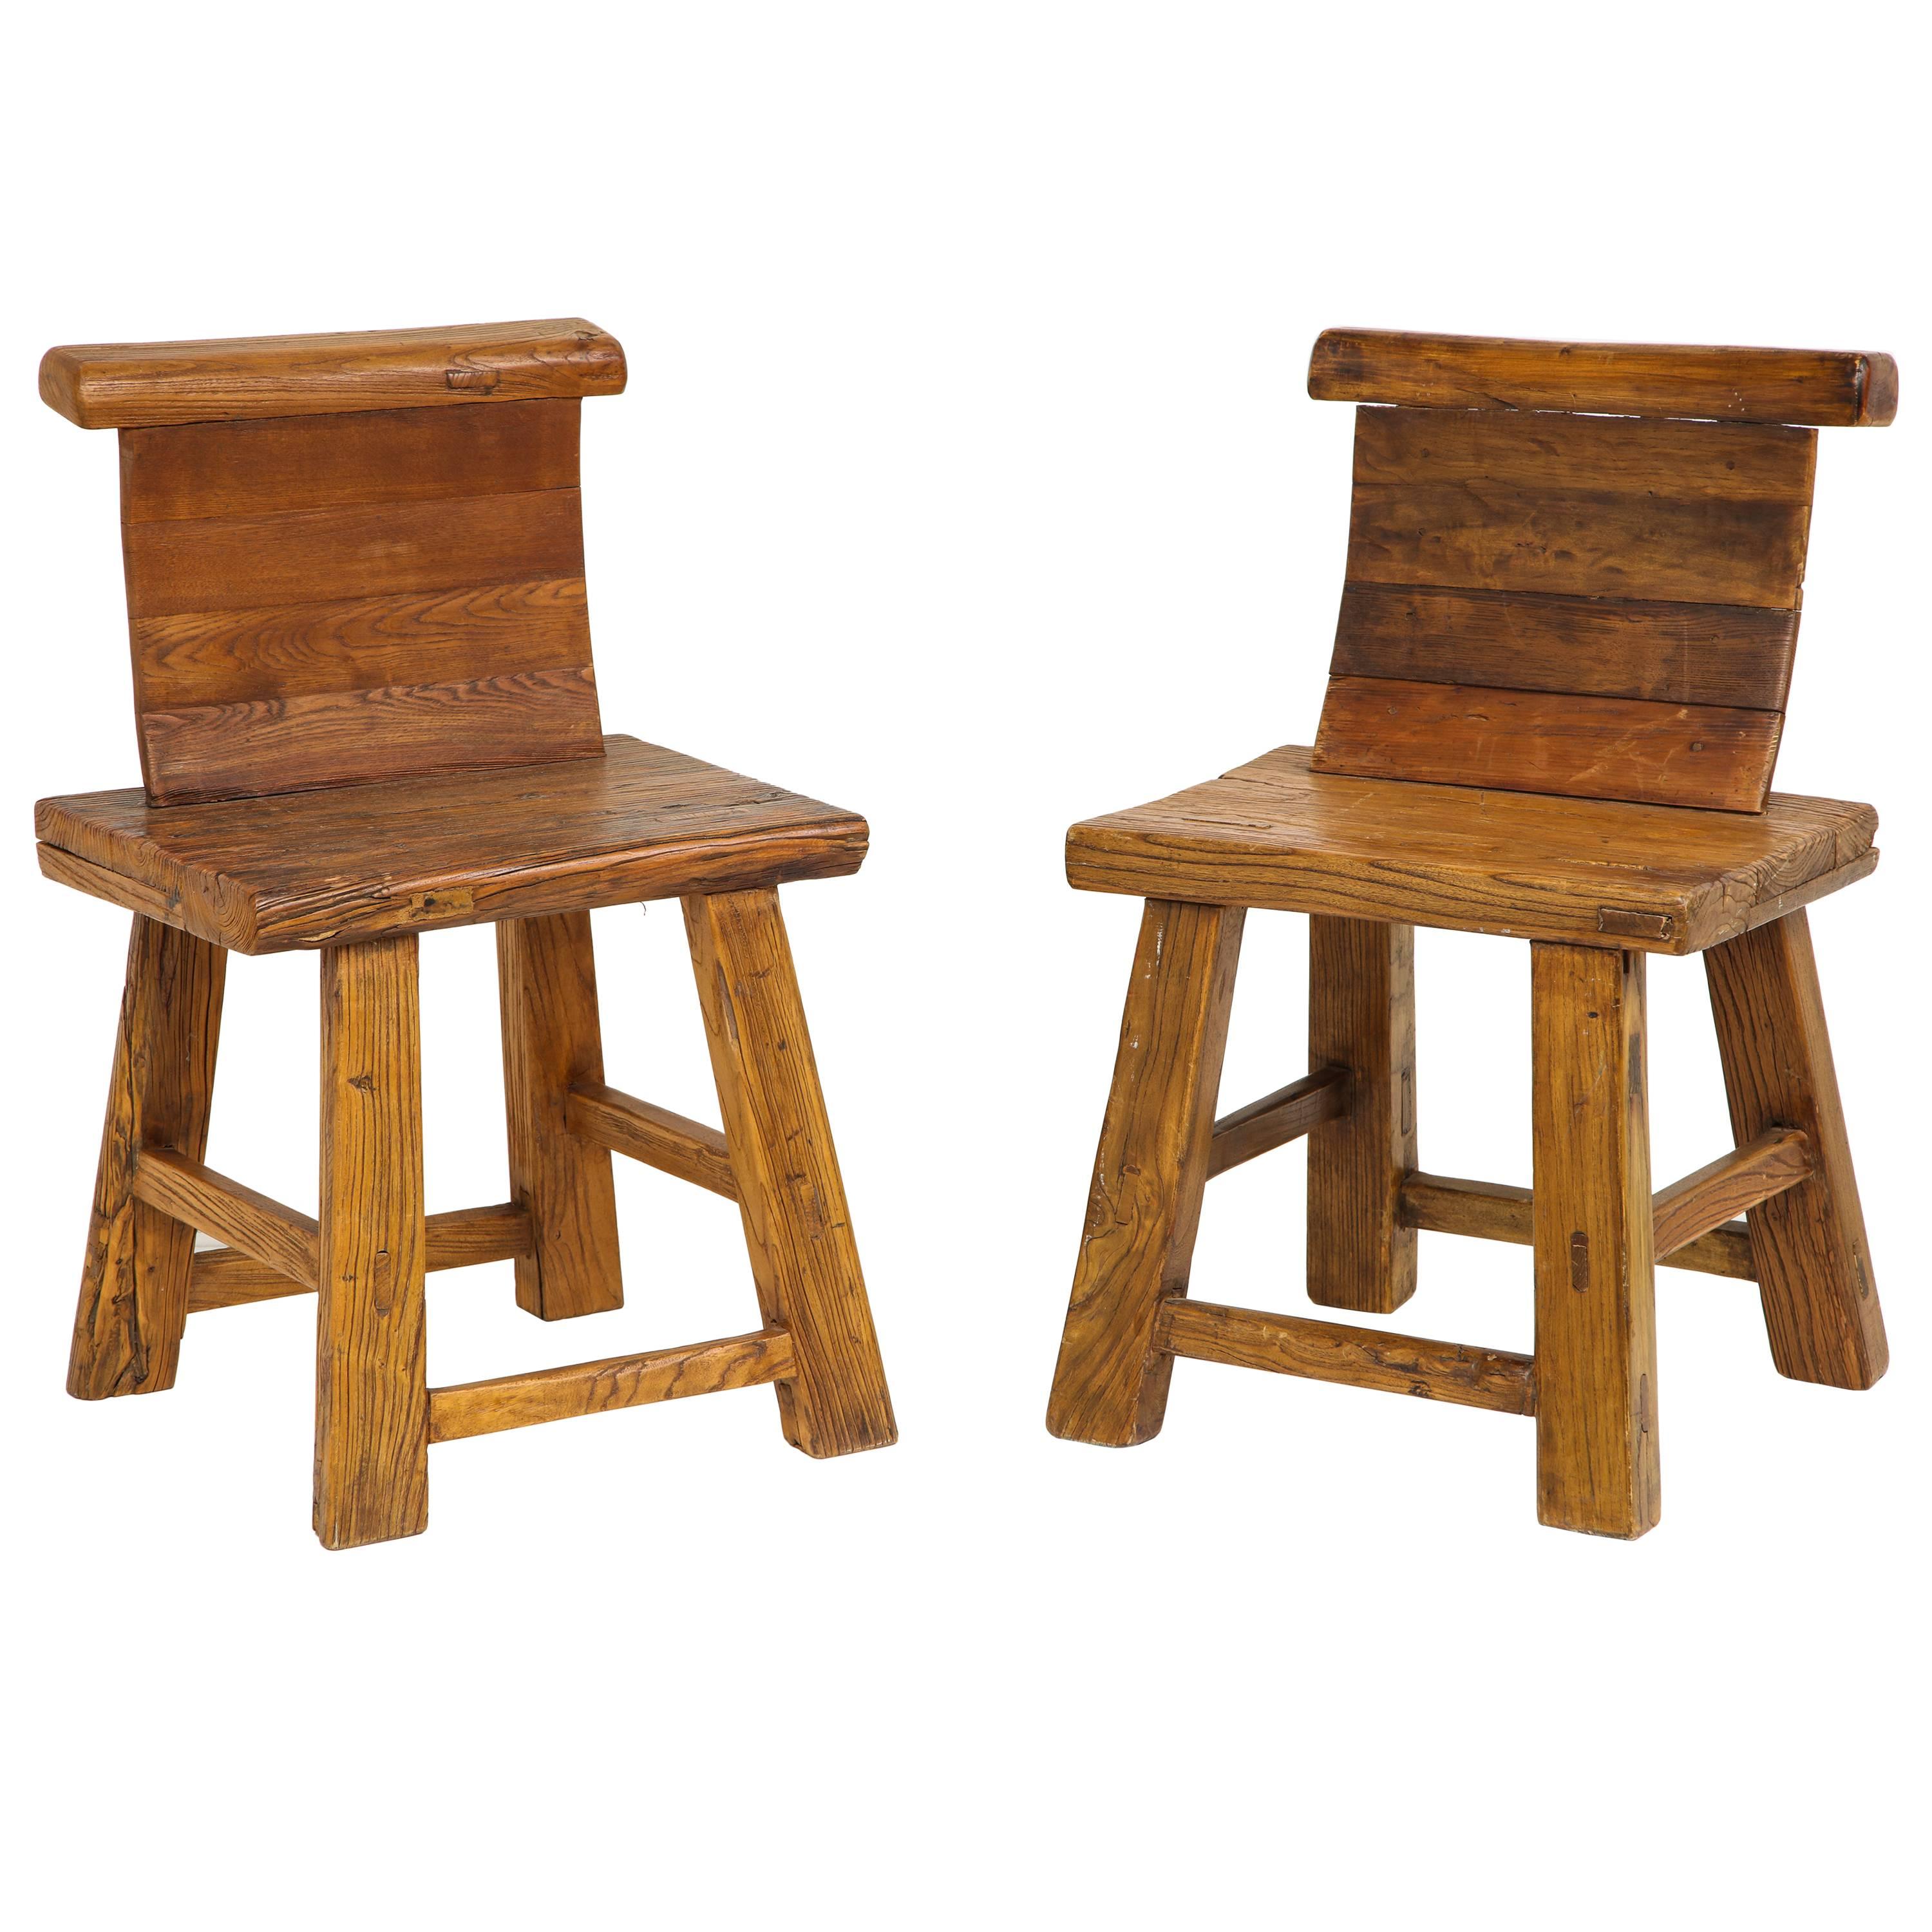 Pair of Primitive Rustic Side Chairs